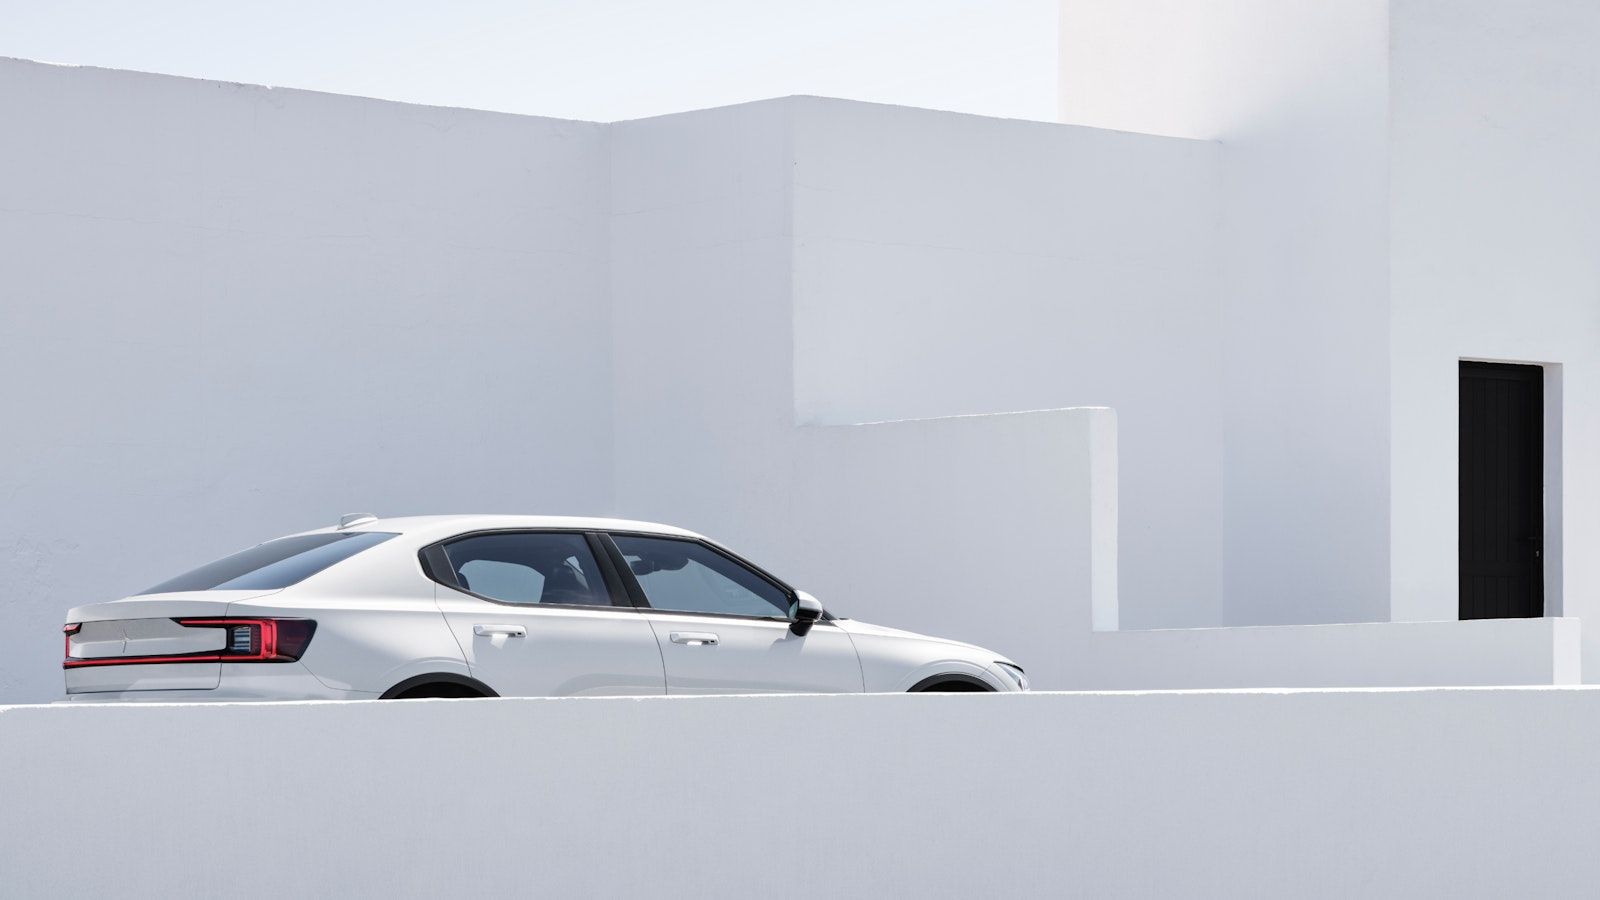 Upper part showing of a white Polestar 2 against white cement walls